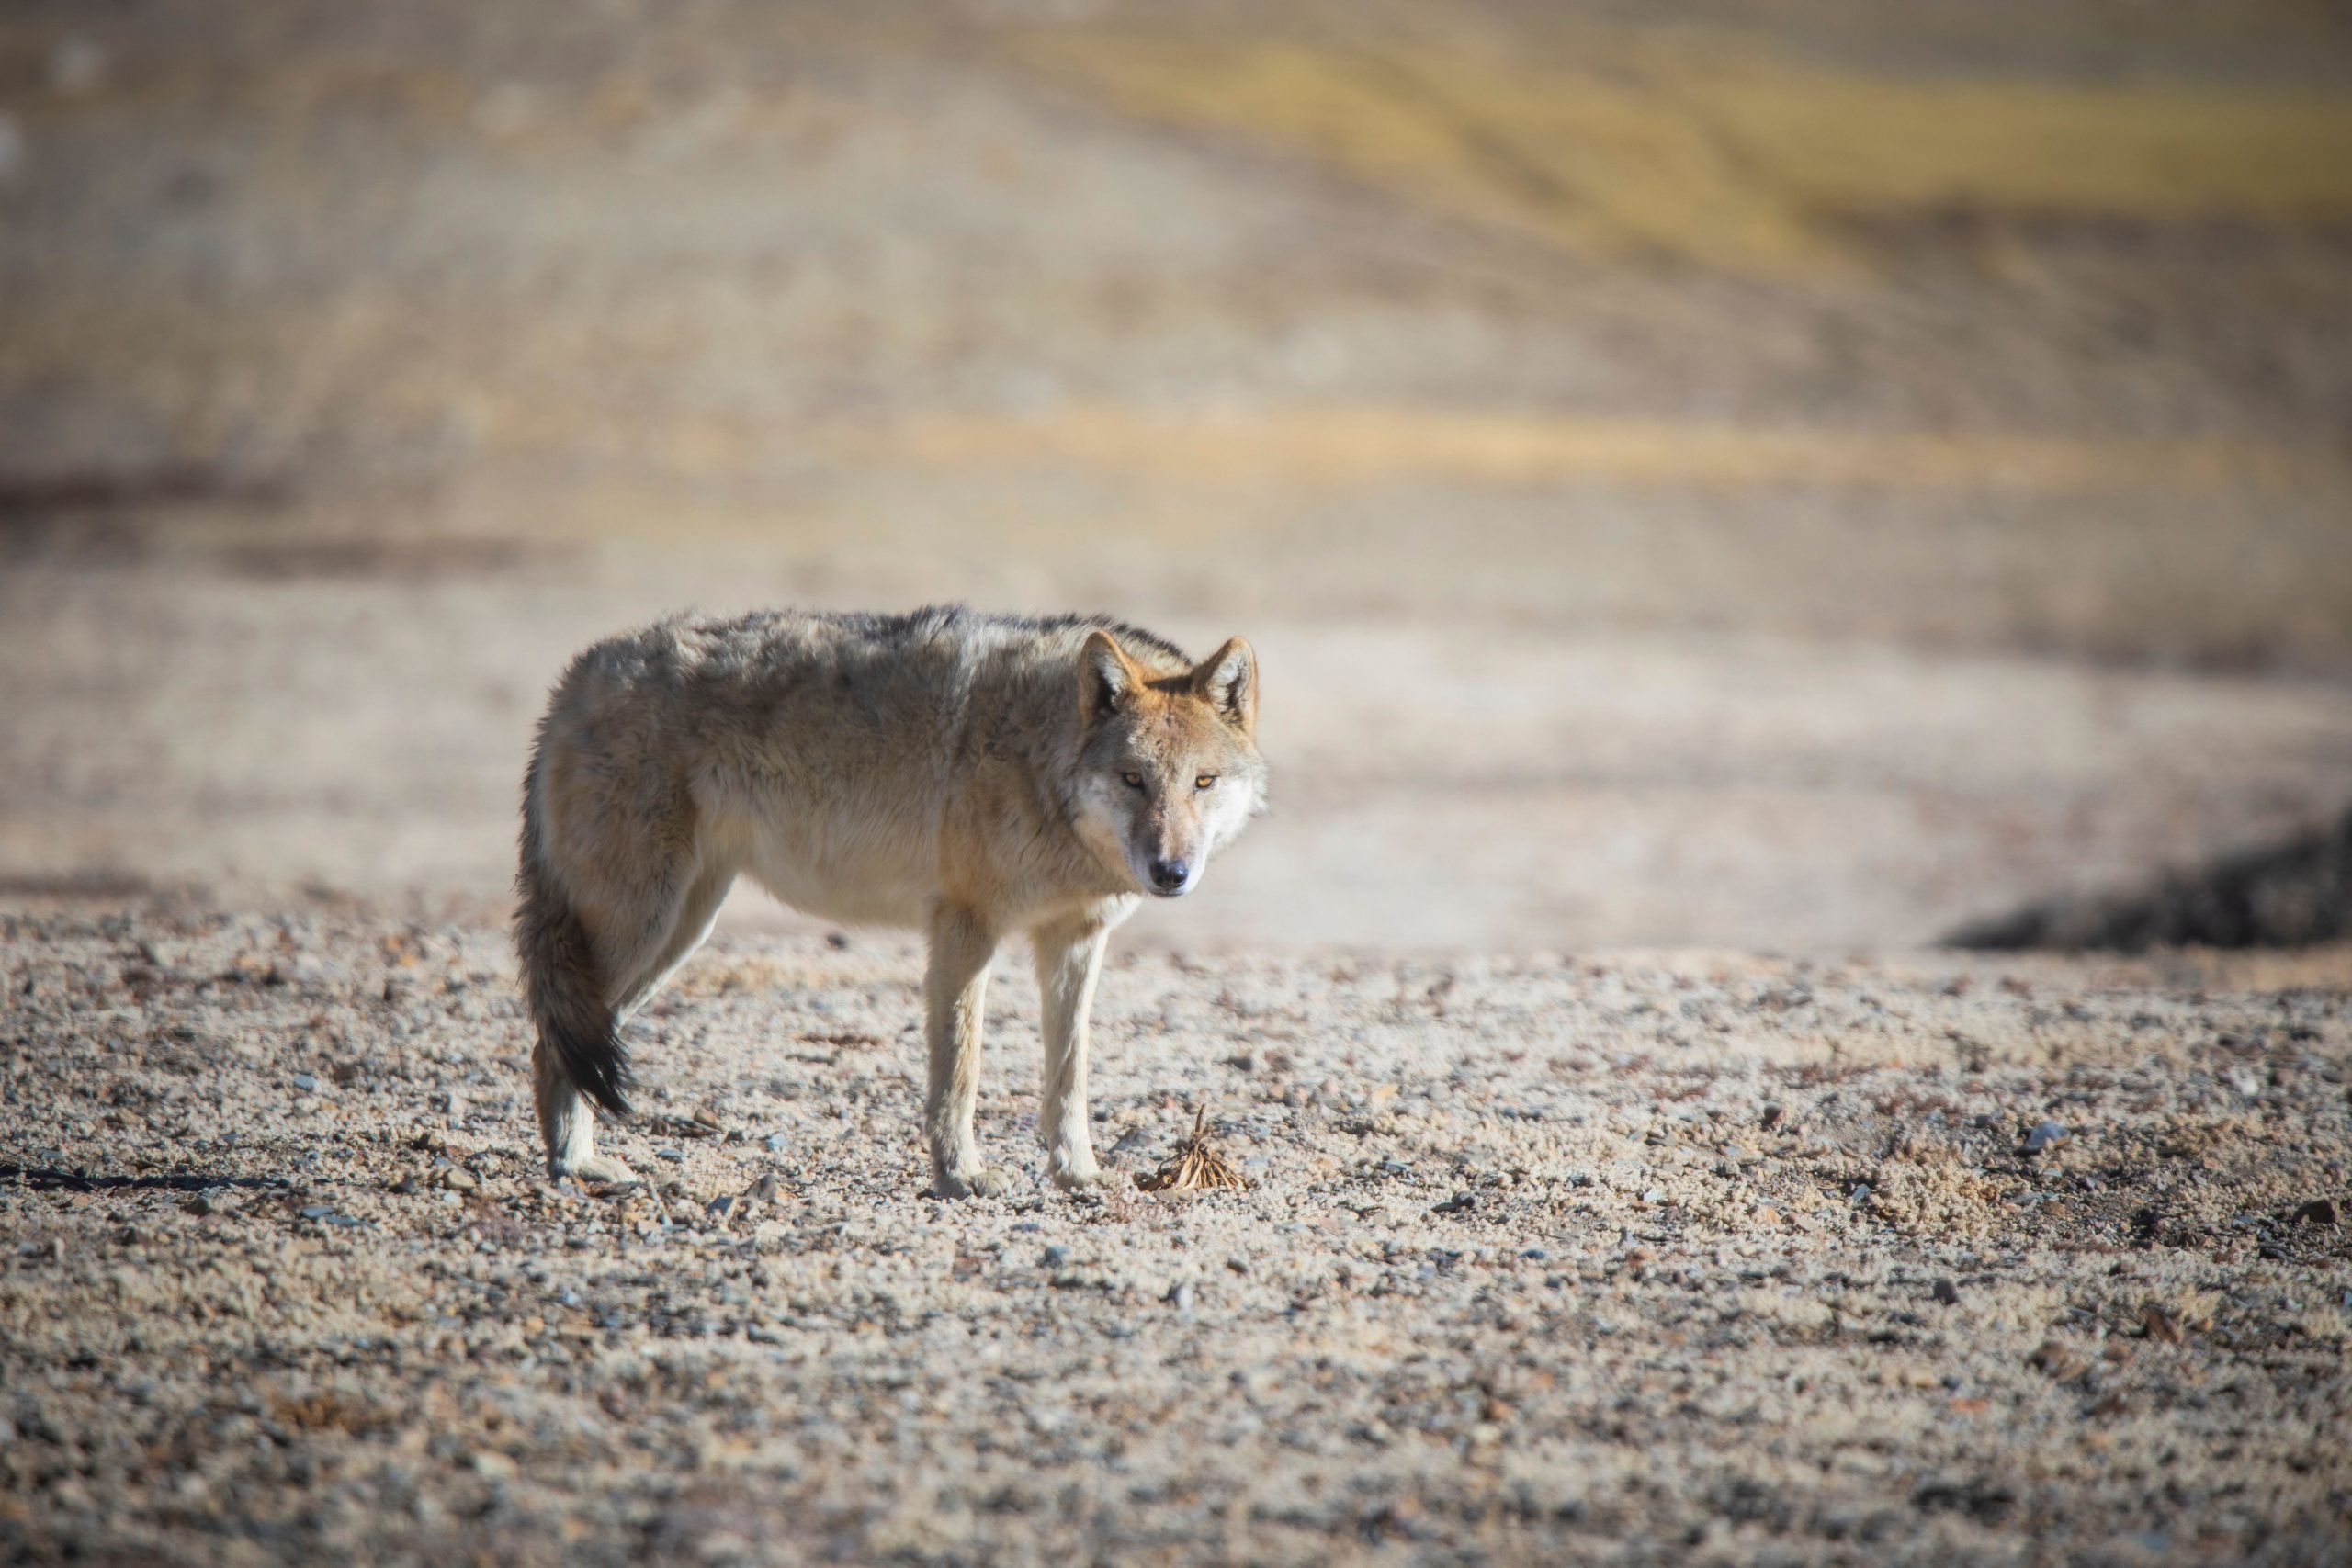 <p>A Himalayan or Tibetan wolf, photographed in Sikkim, India. The enigmatic and little-studied predator is increasingly making its presence known in Nepal&#8217;s Everest region. (Image: Sushi Chikane / Alamy)</p>